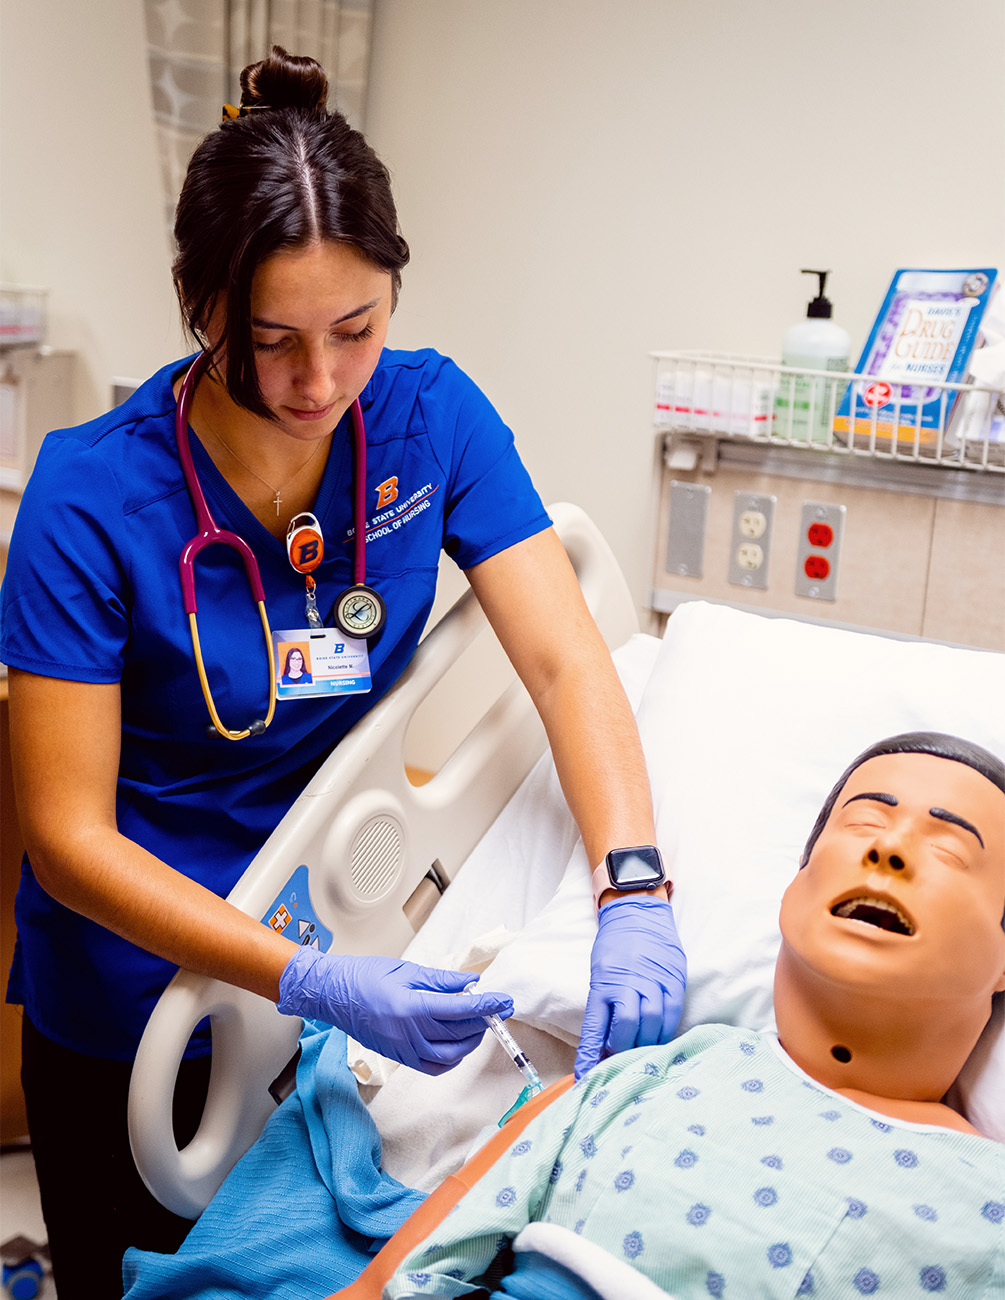 A nursing student gives a manikin an injection in the College of Health Sciences Simulation Center.